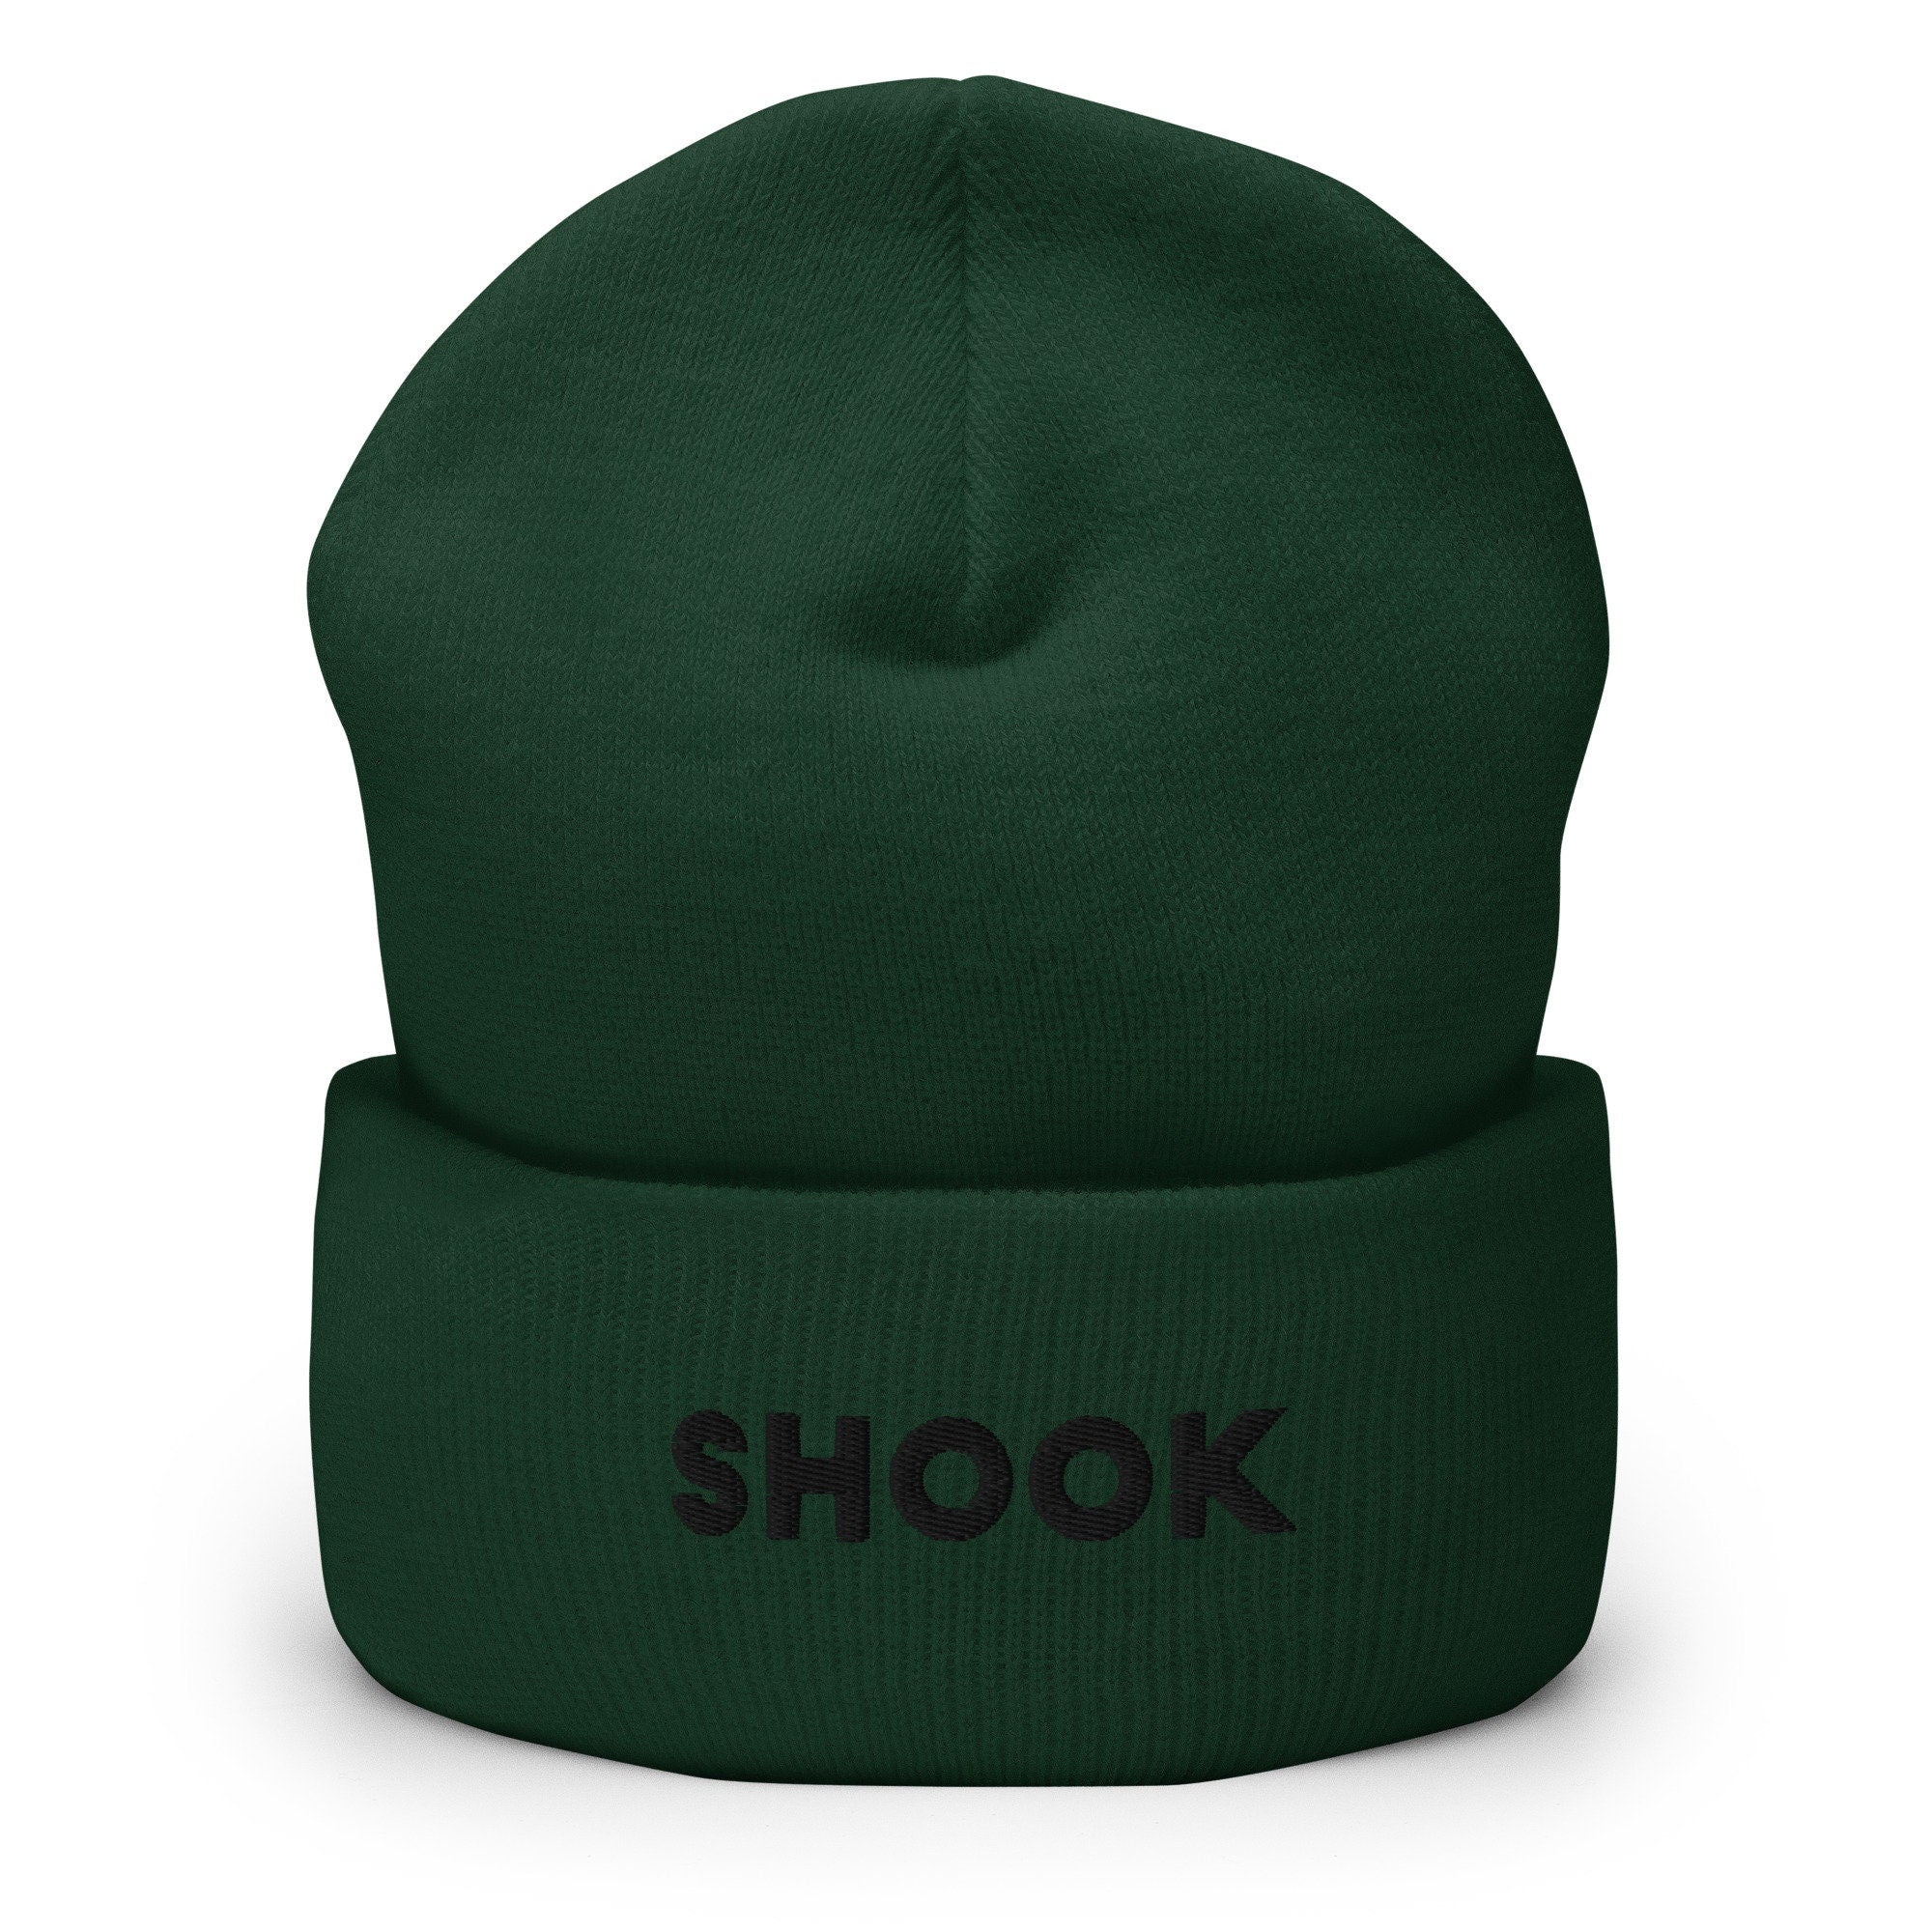 Shook Embroidered Beanie, Handmade Cuffed Knit Unisex Slouchy Adult Winter Hat Cap Gift